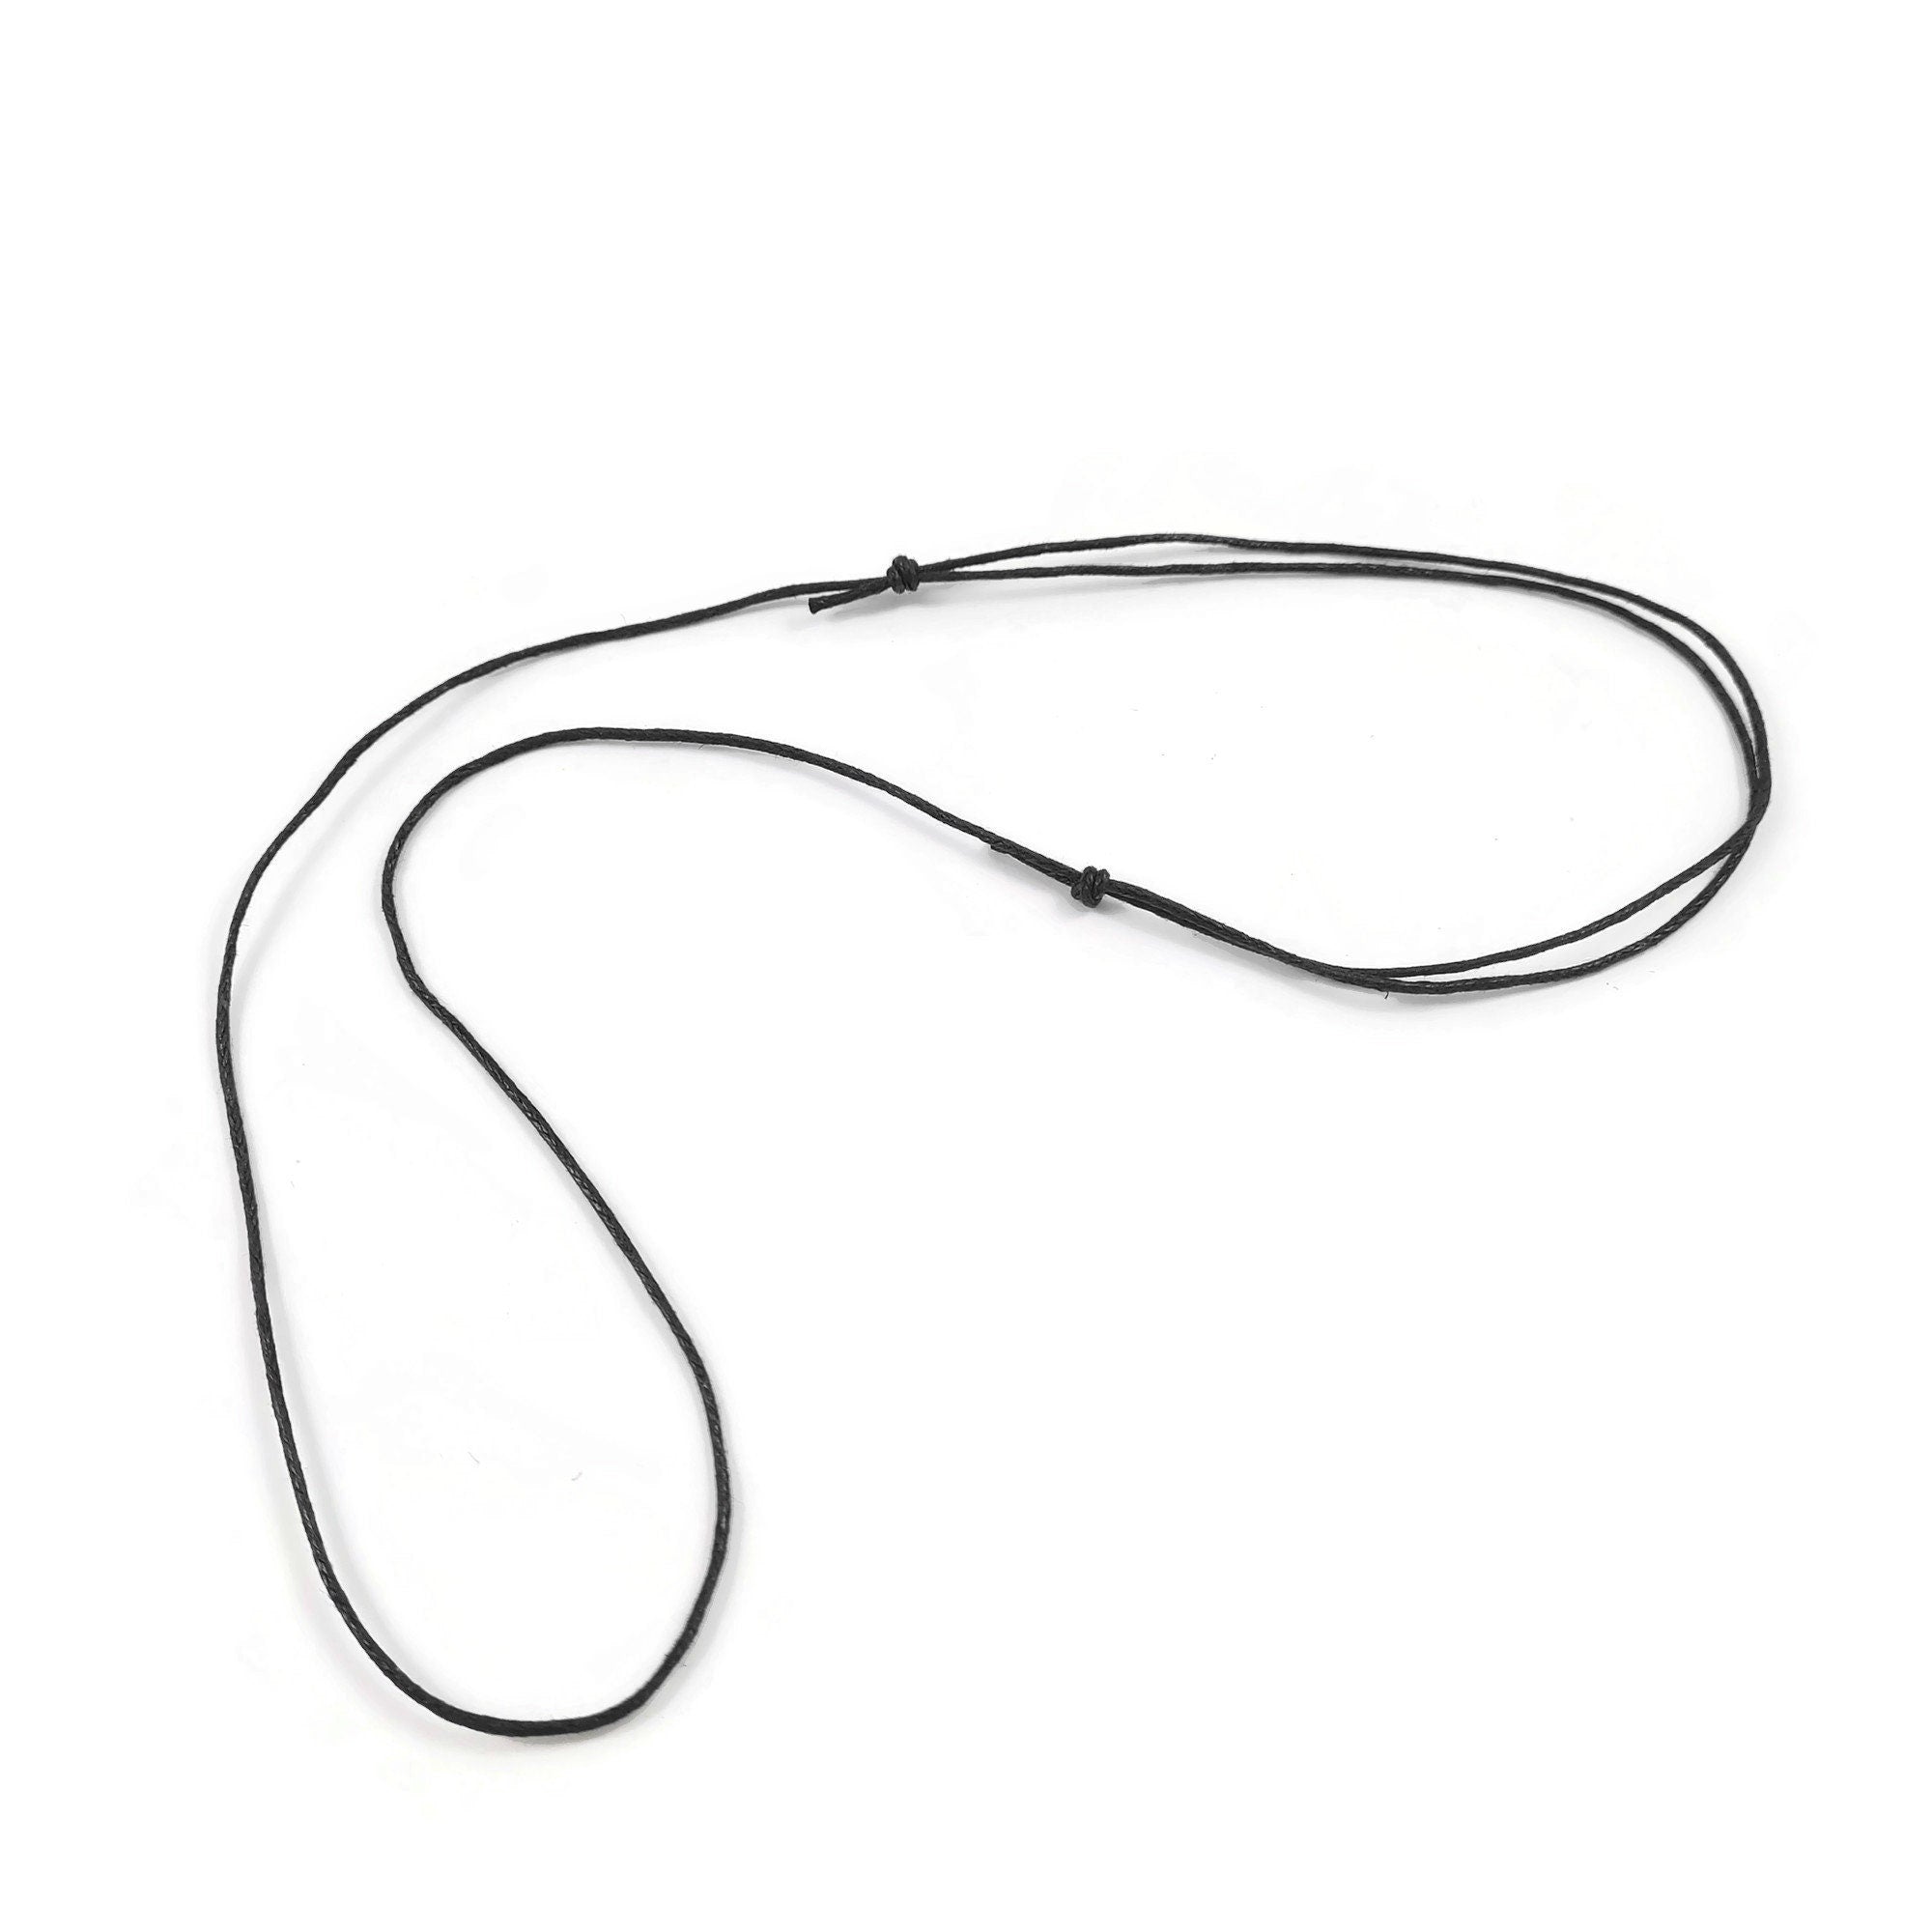 Adjustable cord necklace, Black waxed cotton string 1mm, 2mm